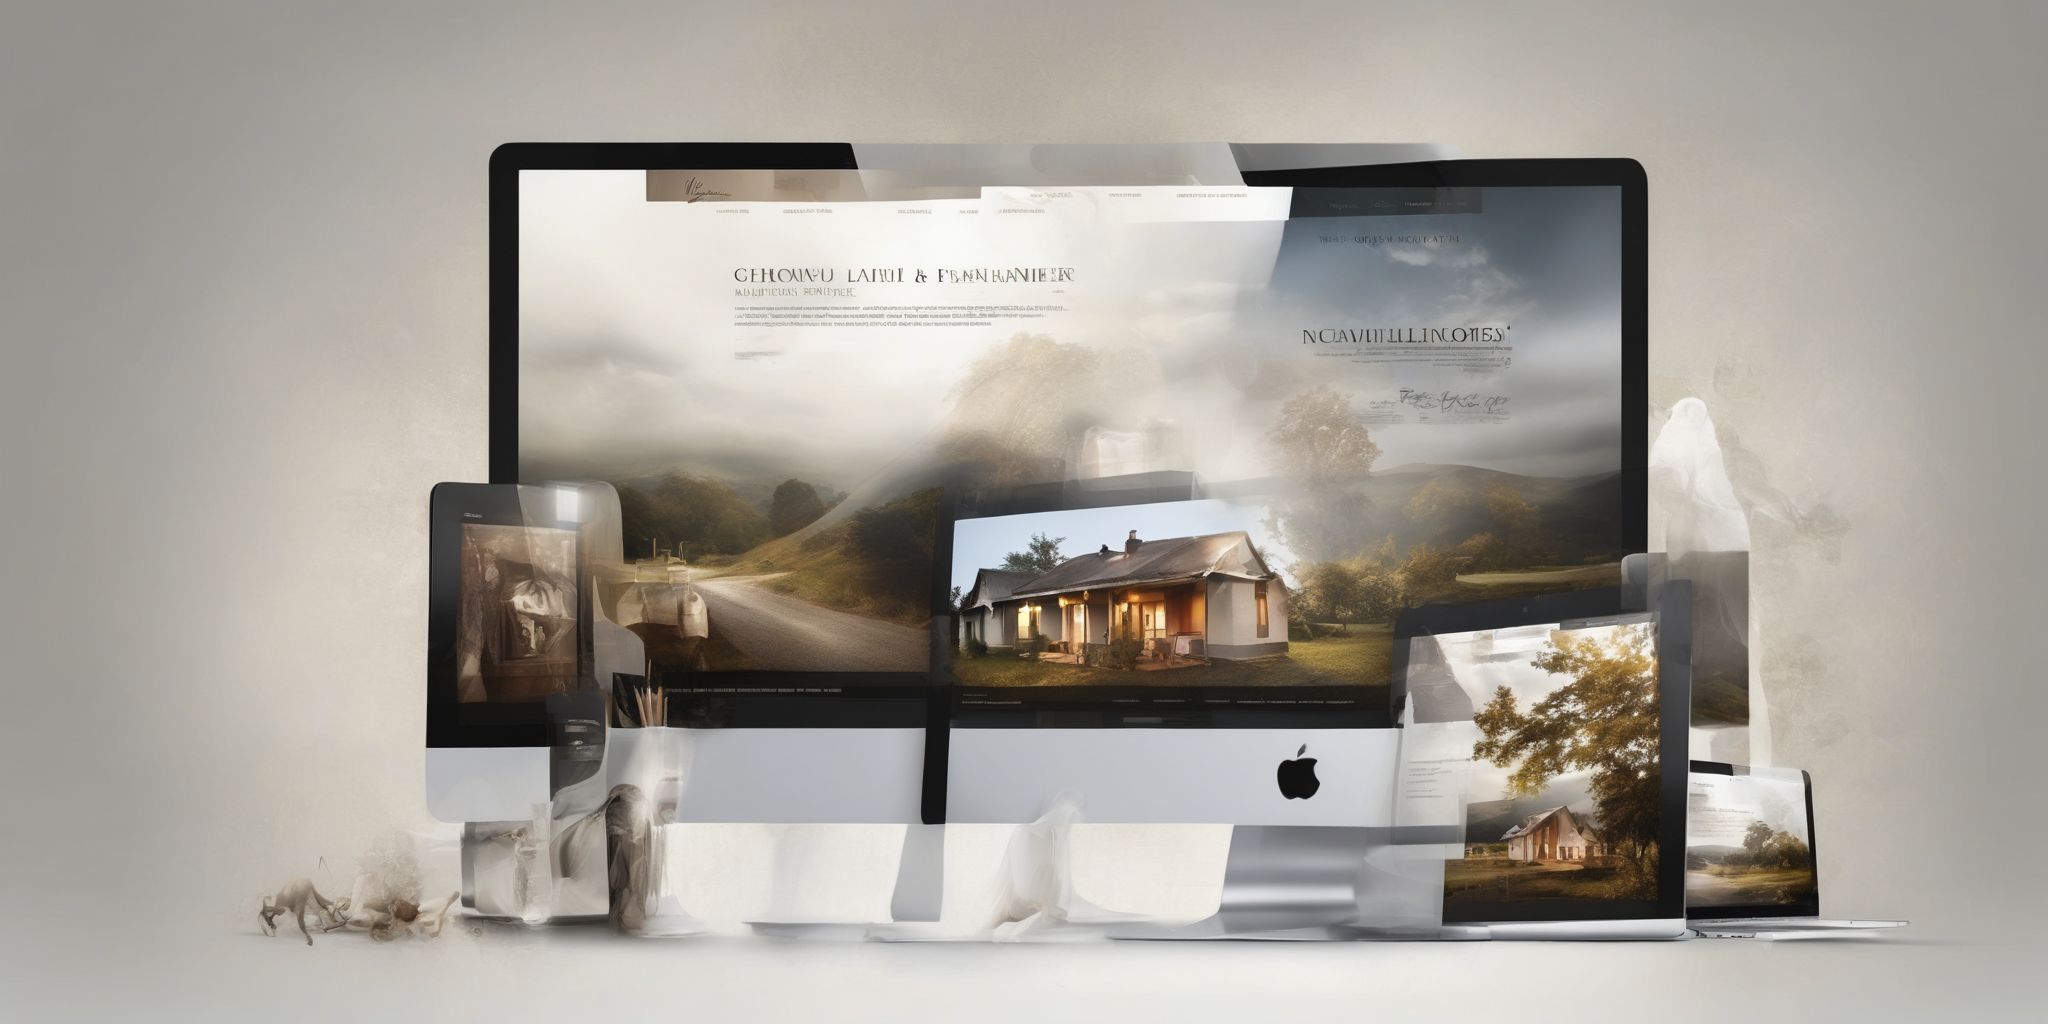 Website  in realistic, photographic style